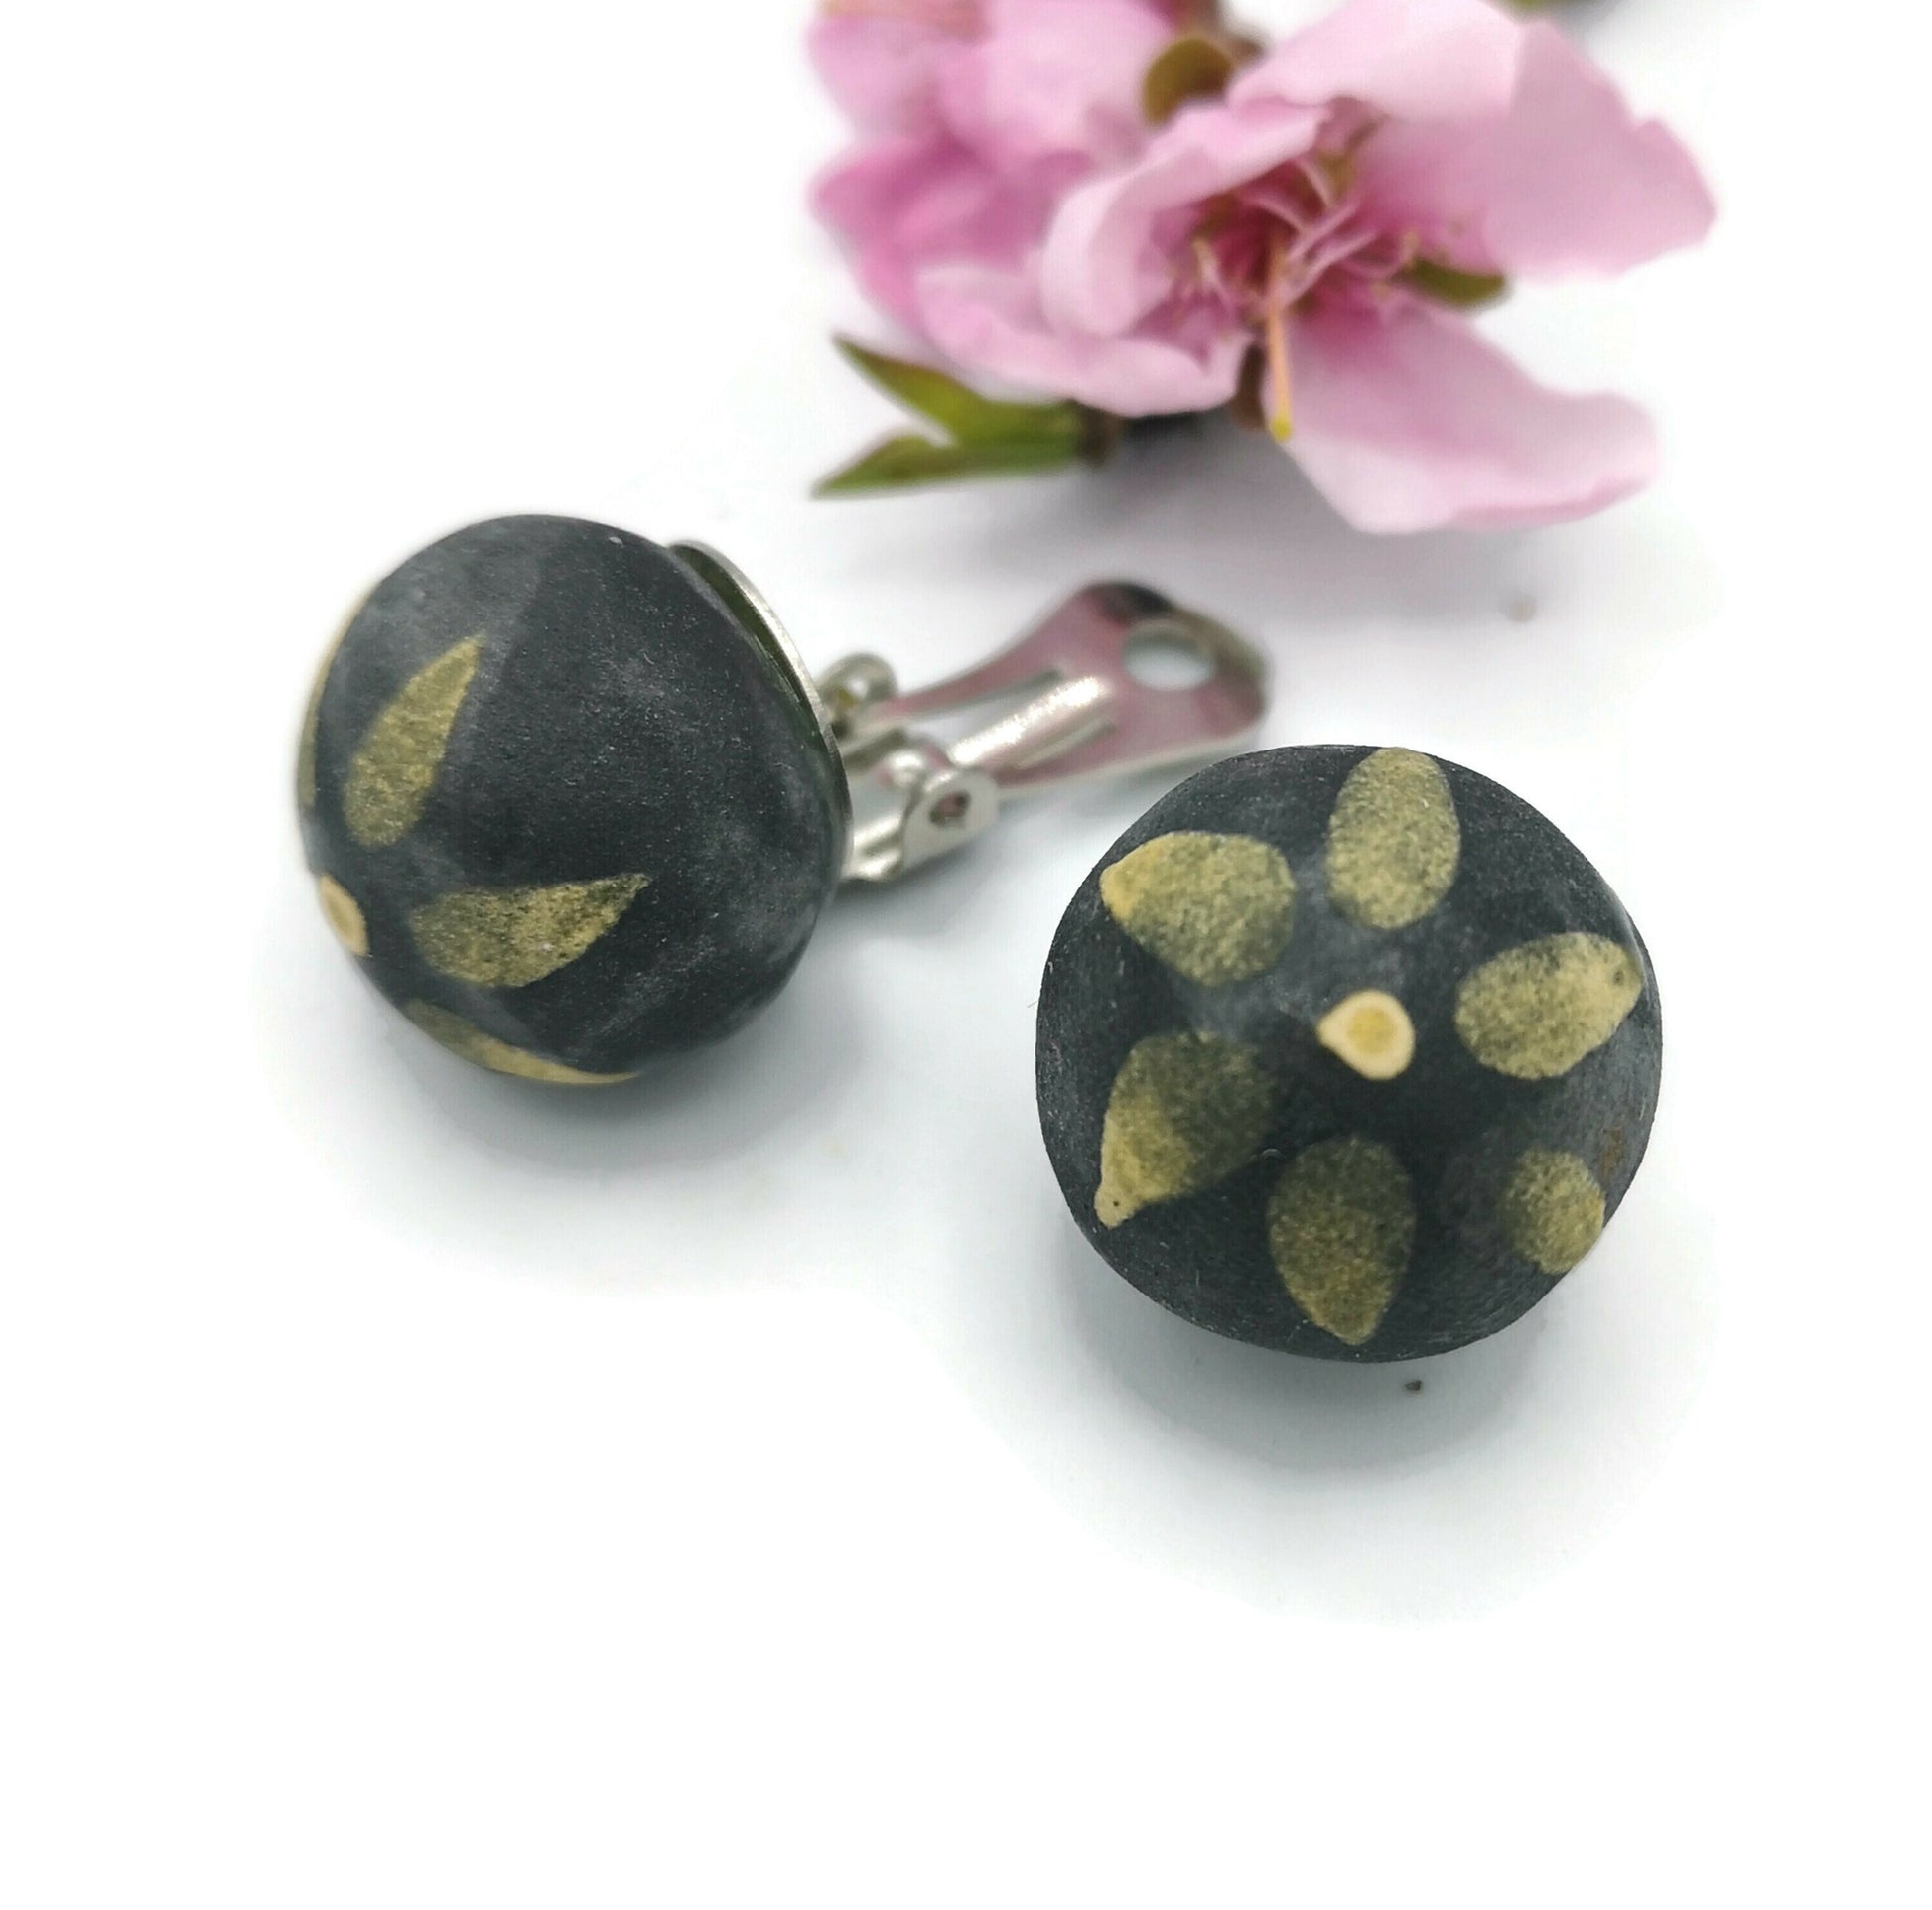 Black and Yellow Floral Clip On Earrings For Non Pierced Ears, Hand Painted Clay Stud Earrings, Handmade Jewelry For Mothers Day Gift - Ceramica Ana Rafael